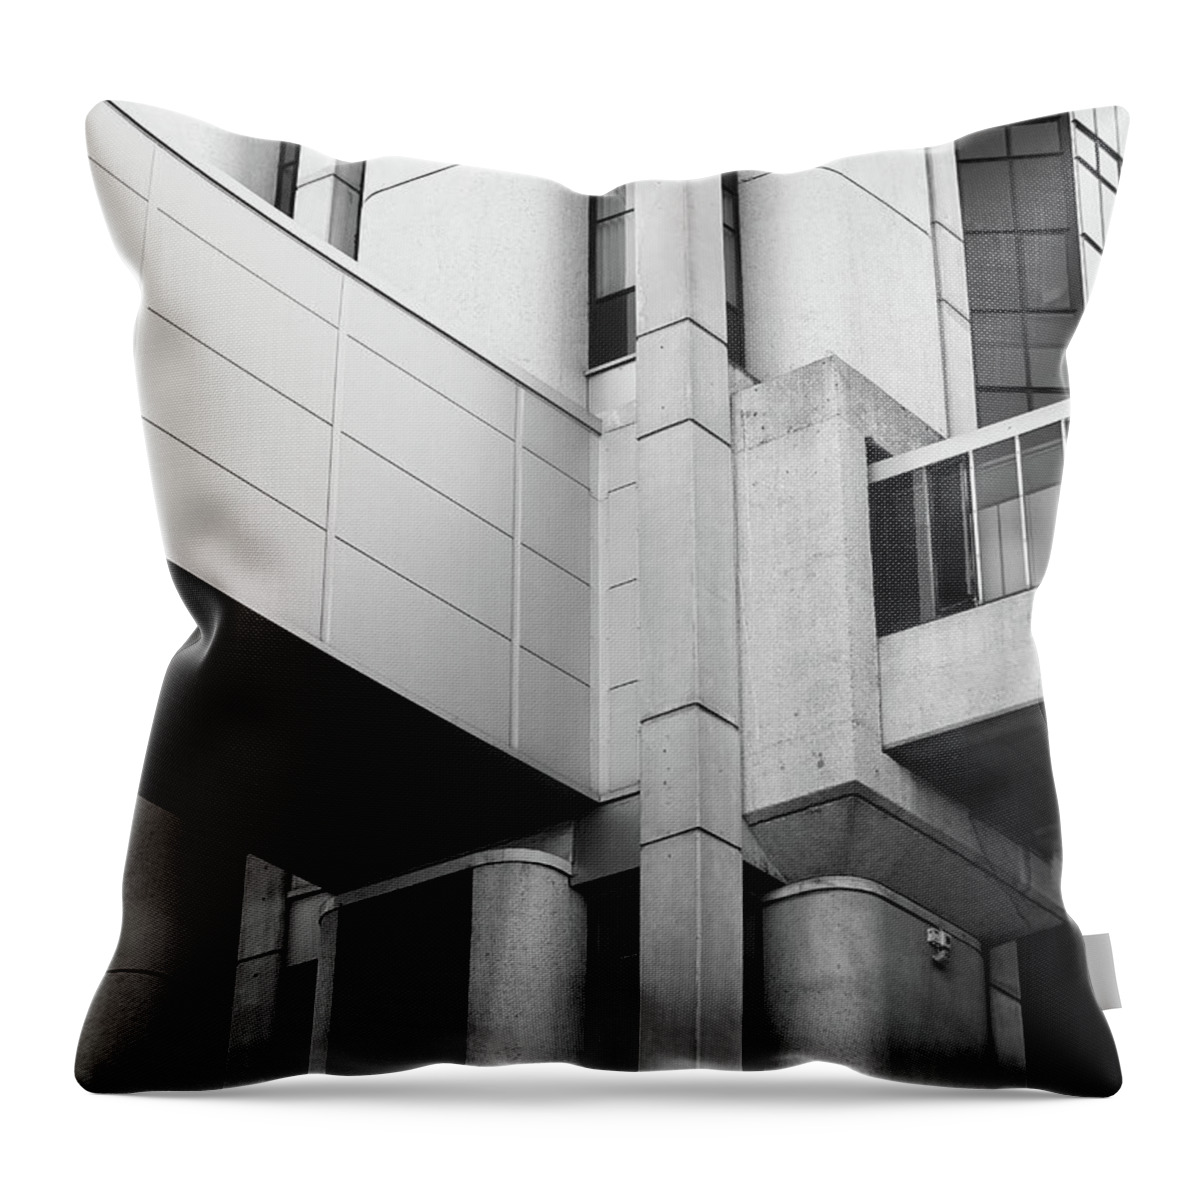 Brutalist Throw Pillow featuring the photograph Brutalist Junction - Worsley Building Leeds by Philip Openshaw